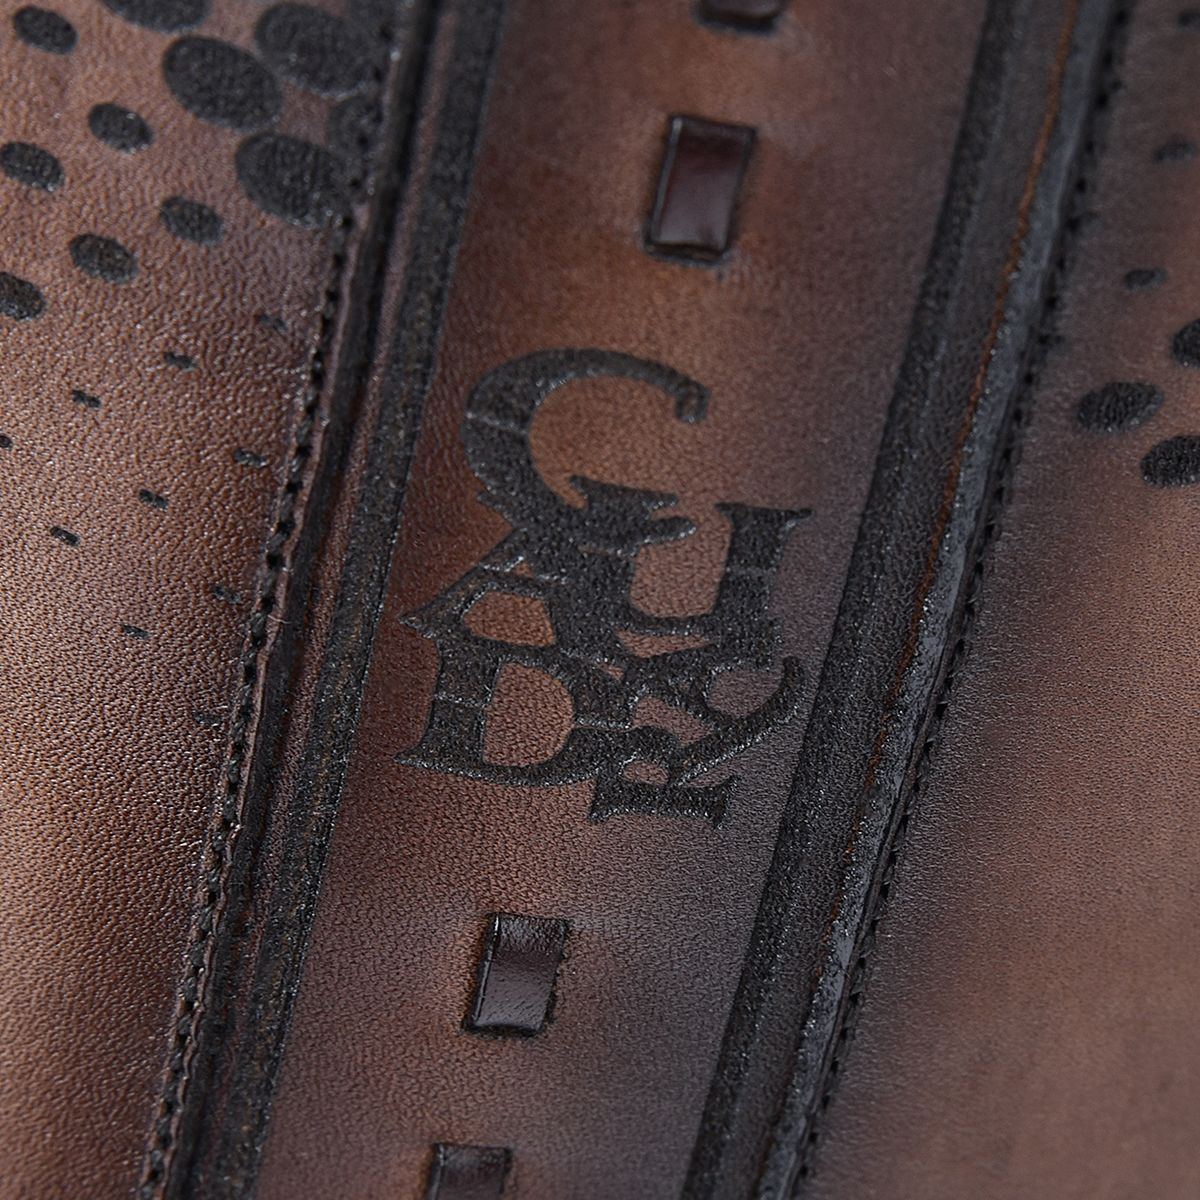 Engraved brown leather casual boot